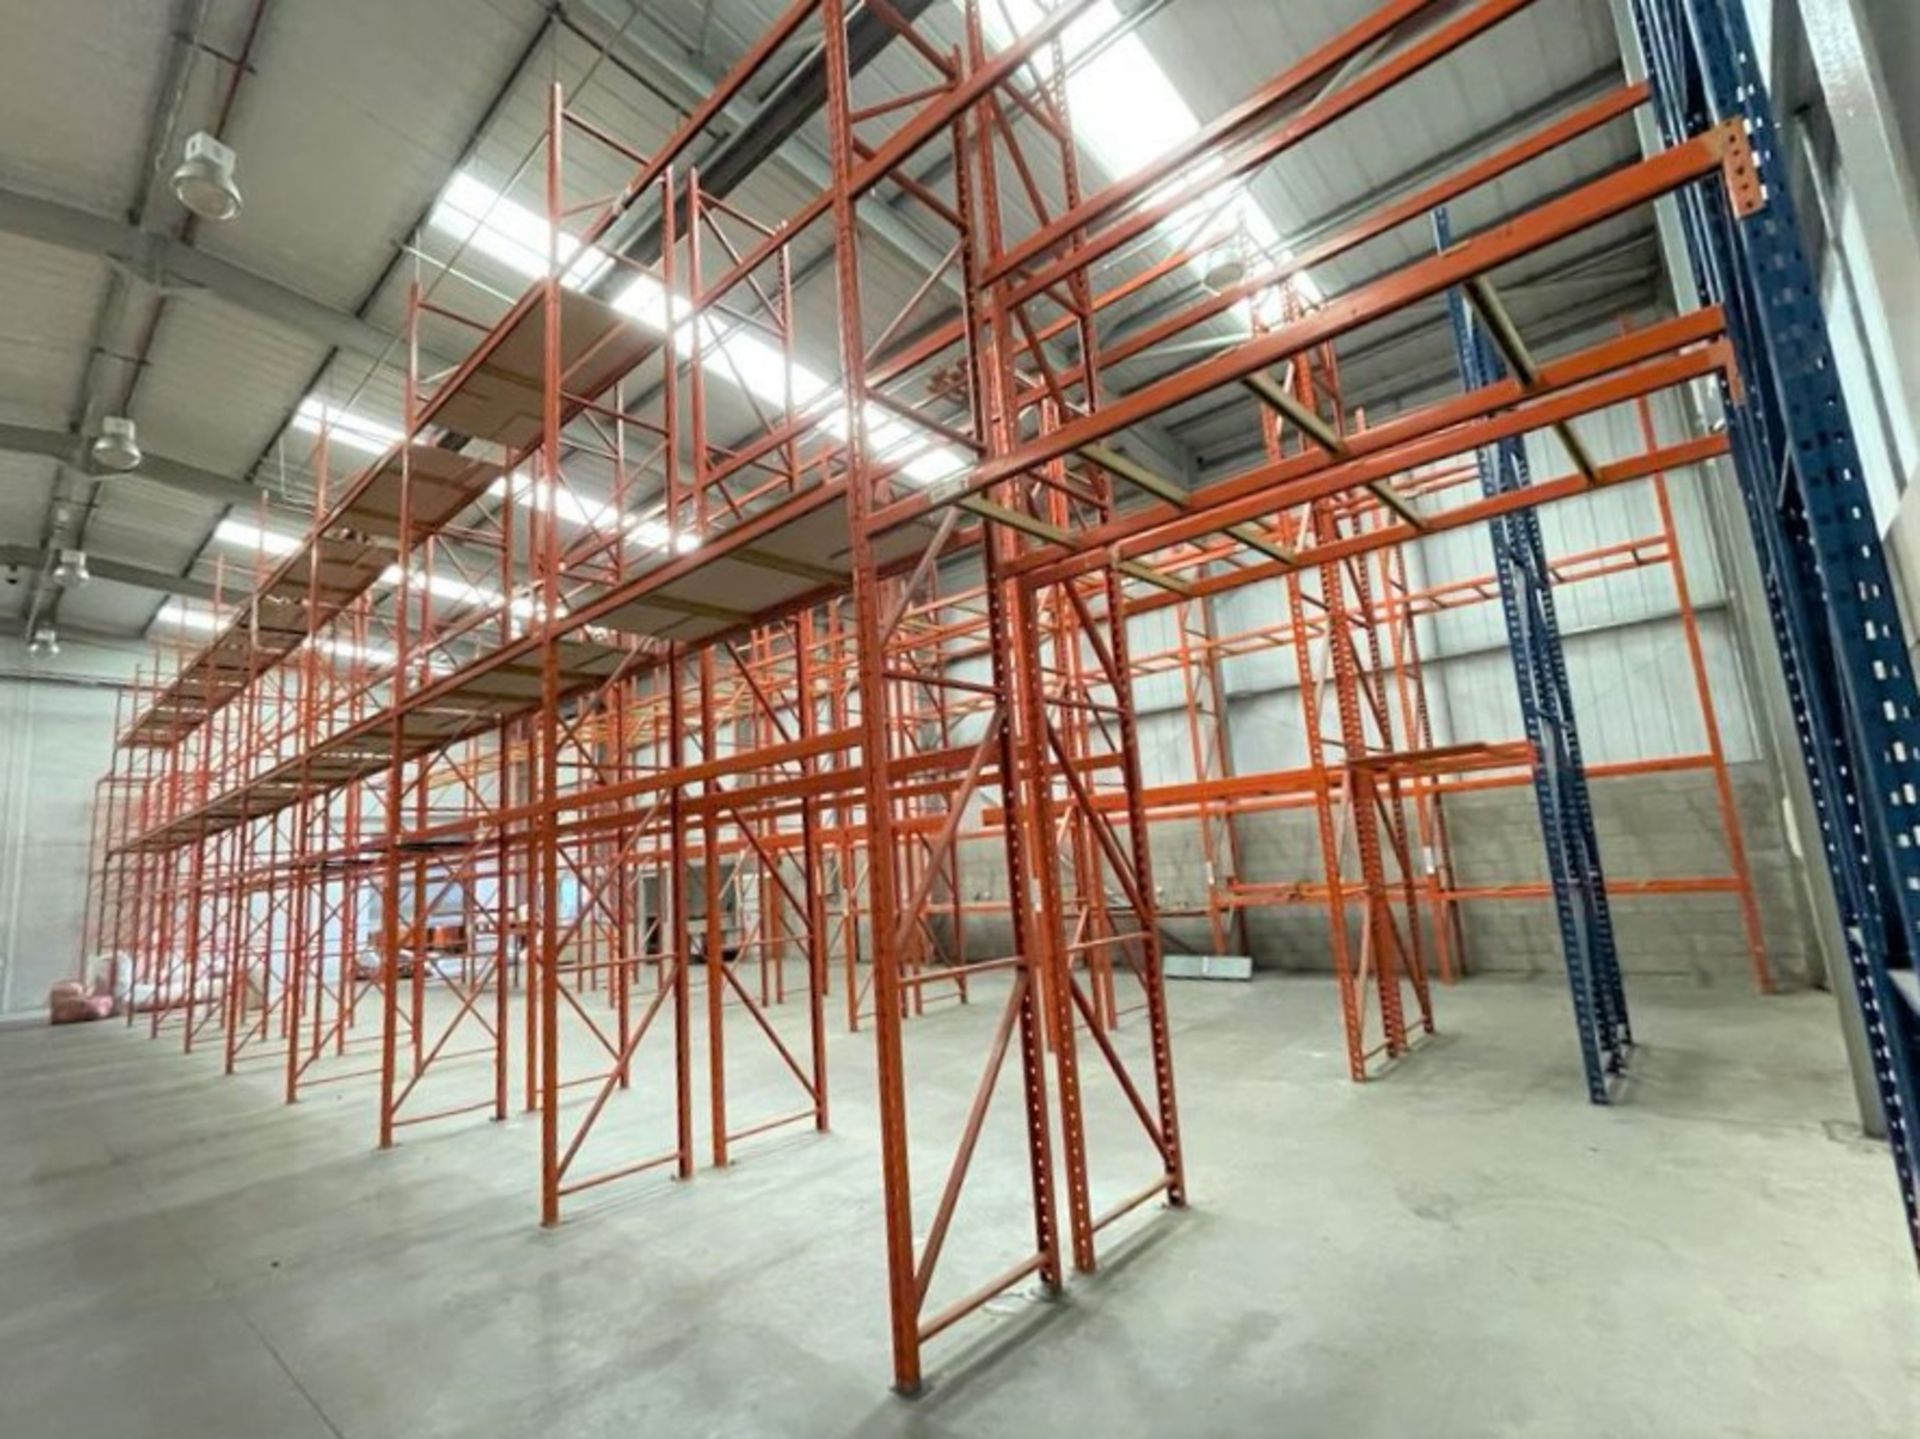 11 x Bays of RediRack Warehouse PALLET RACKING - Lot Includes 12 x Uprights and 62 x Crossbeams -